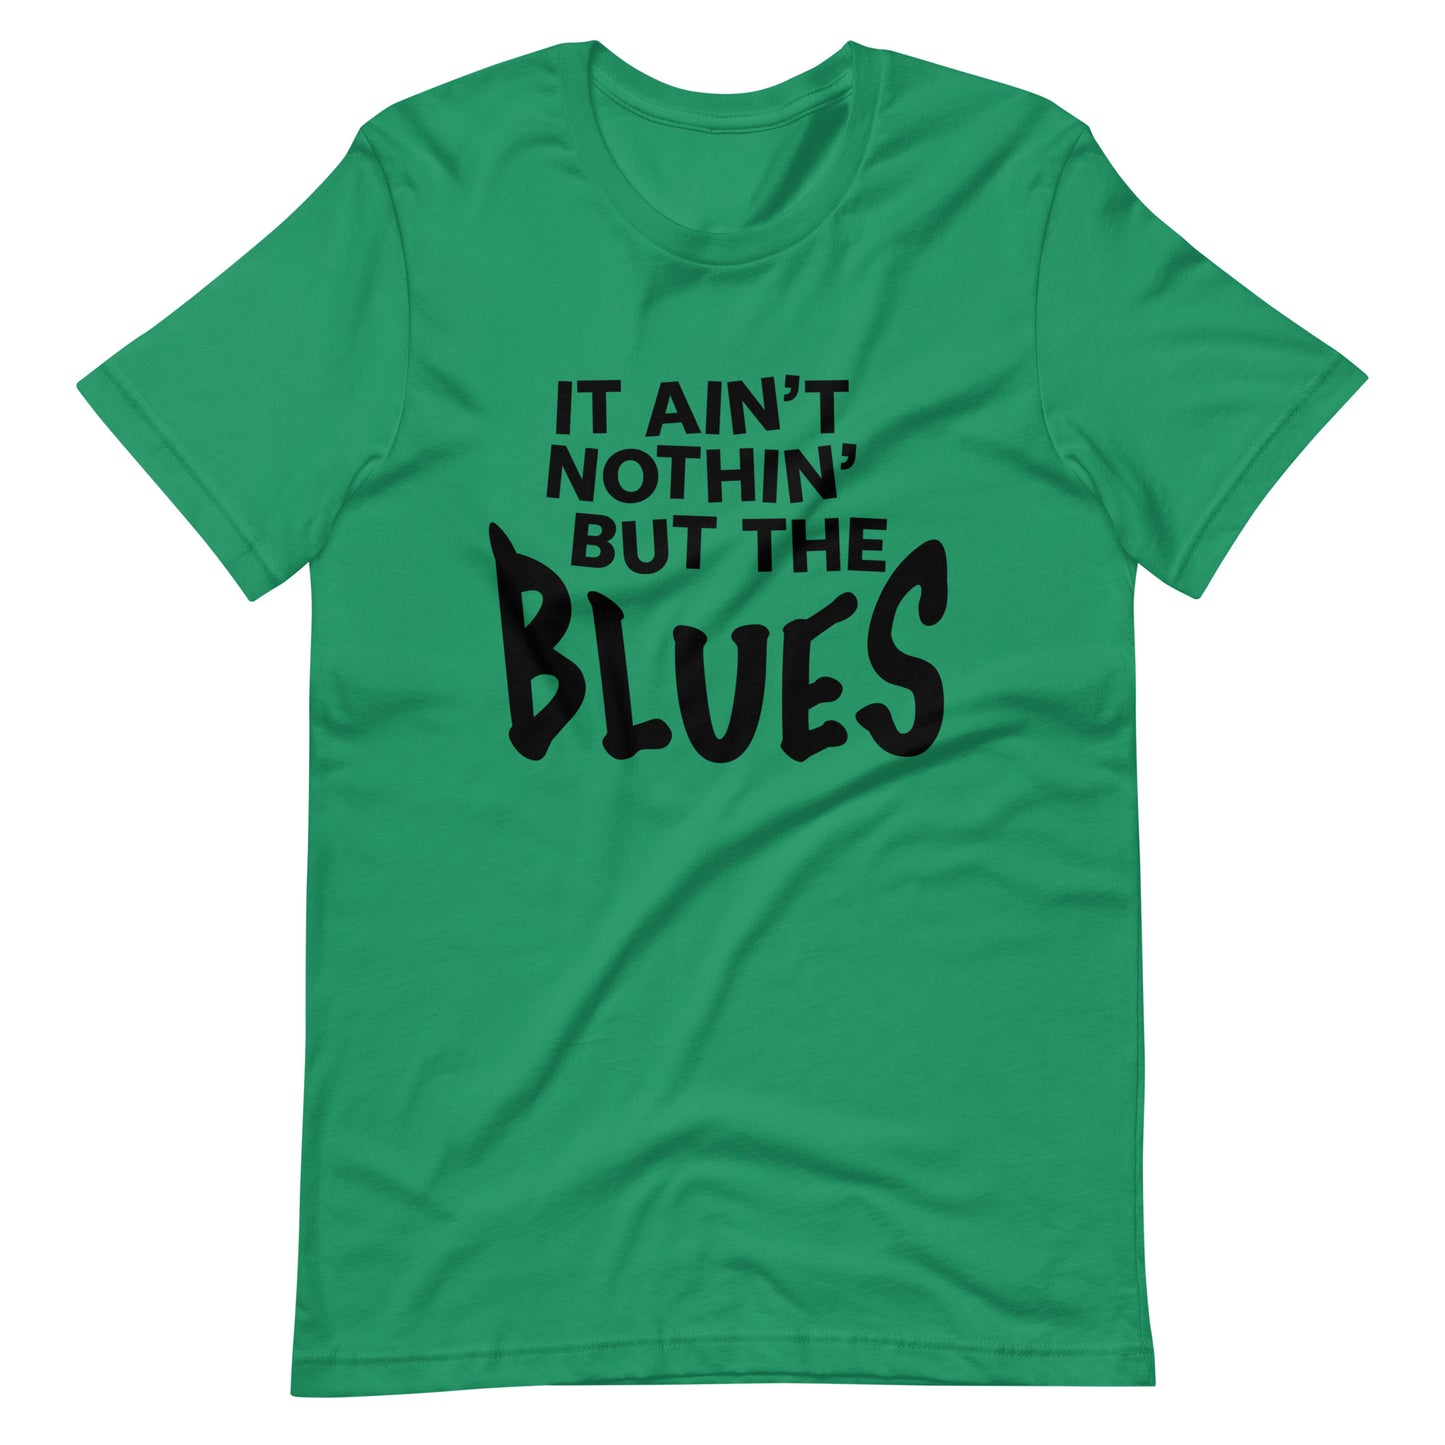 Nothin’ But The Blues Tee